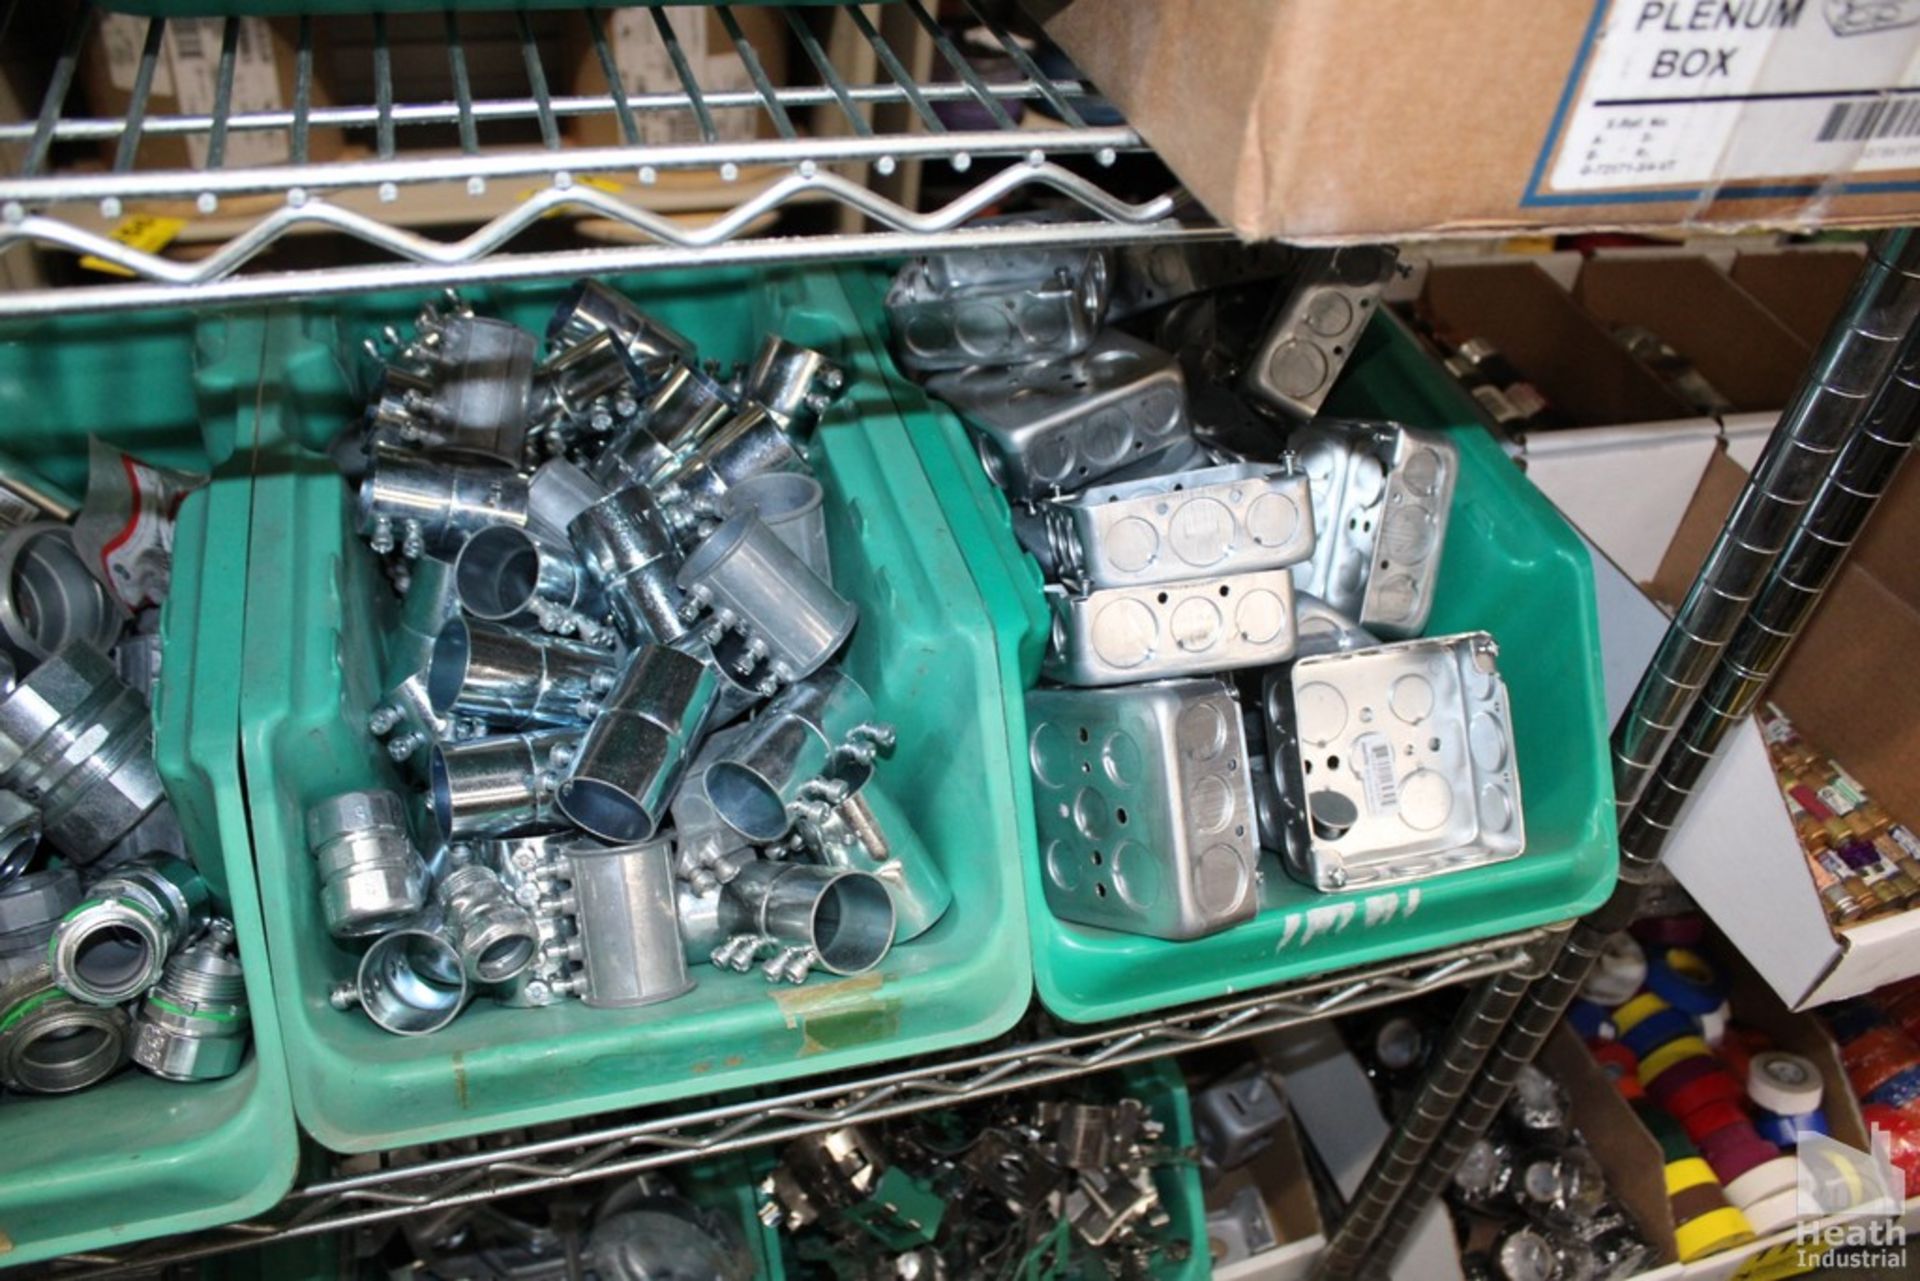 ASSORTED ELECTRICAL FITTINGS ON SHELF, NO BINS - Image 4 of 4